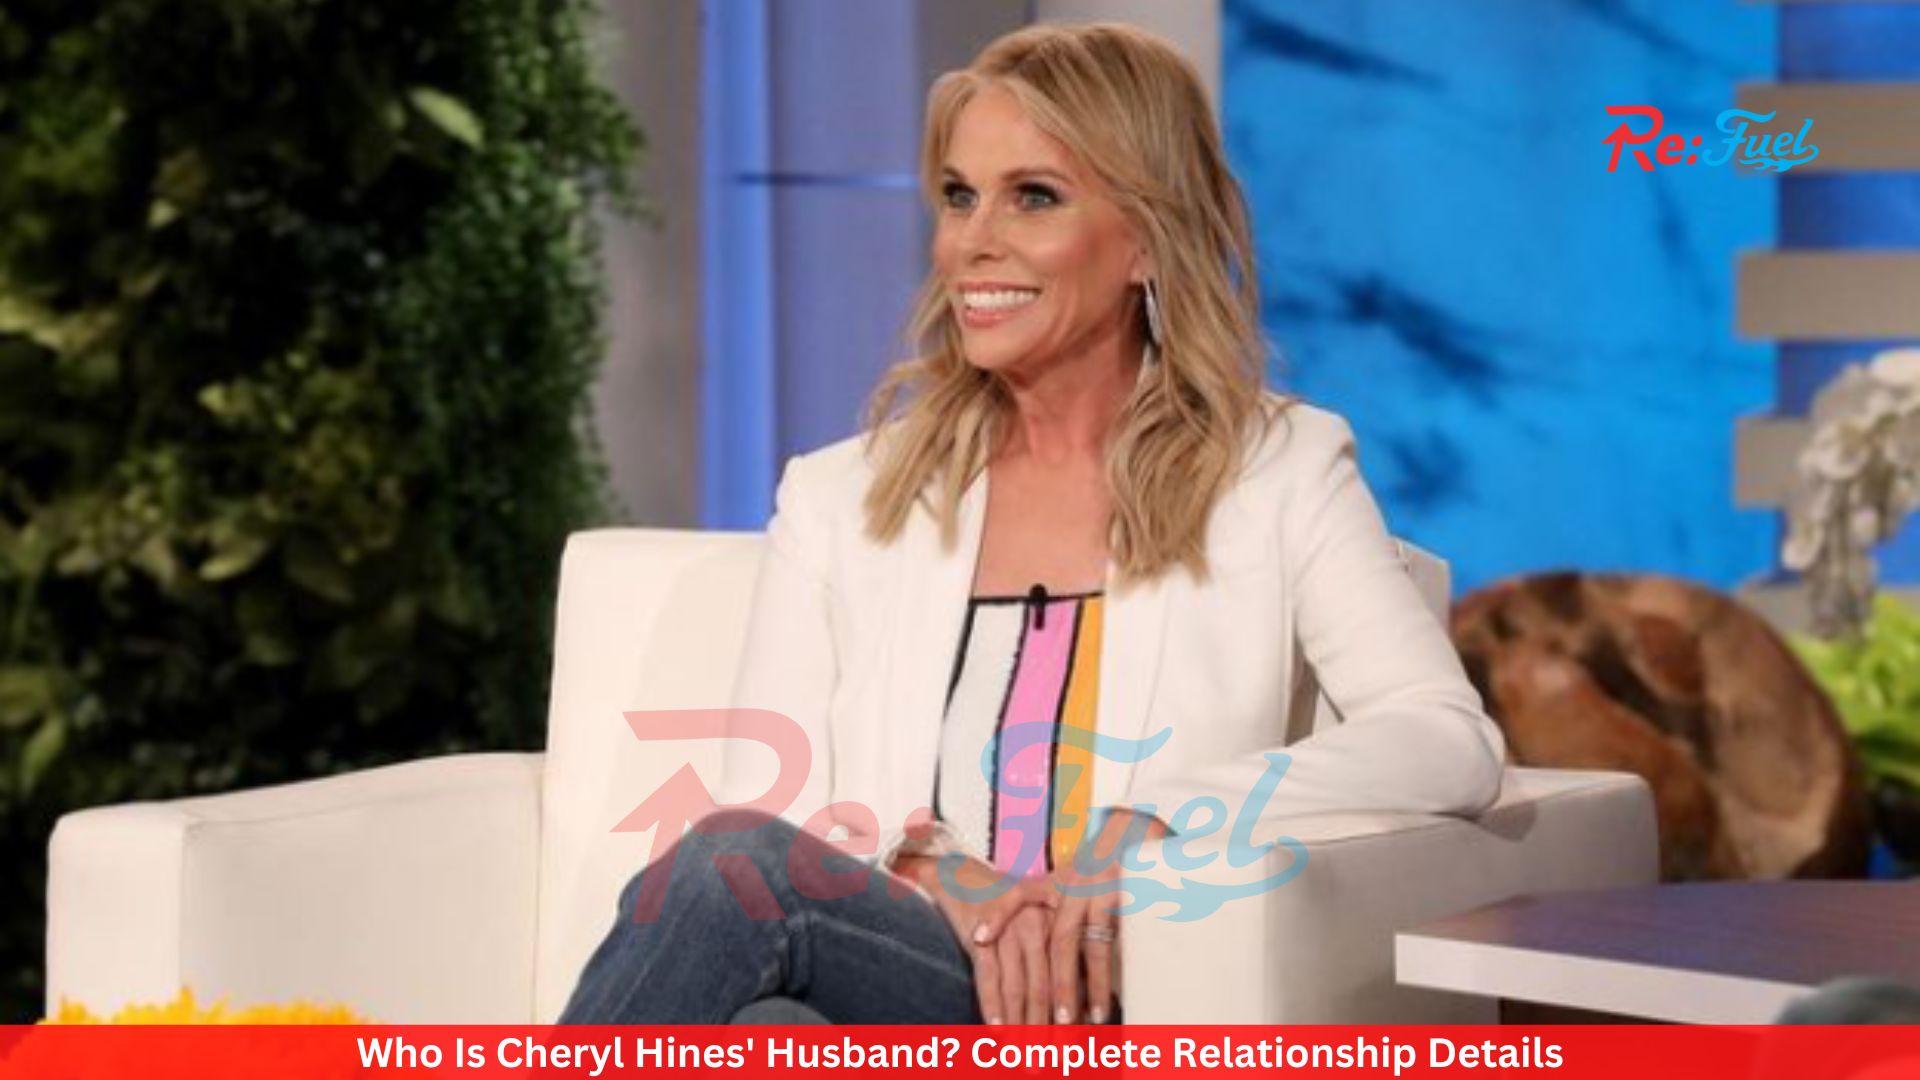 Who Is Cheryl Hines' Husband? Complete Relationship Details